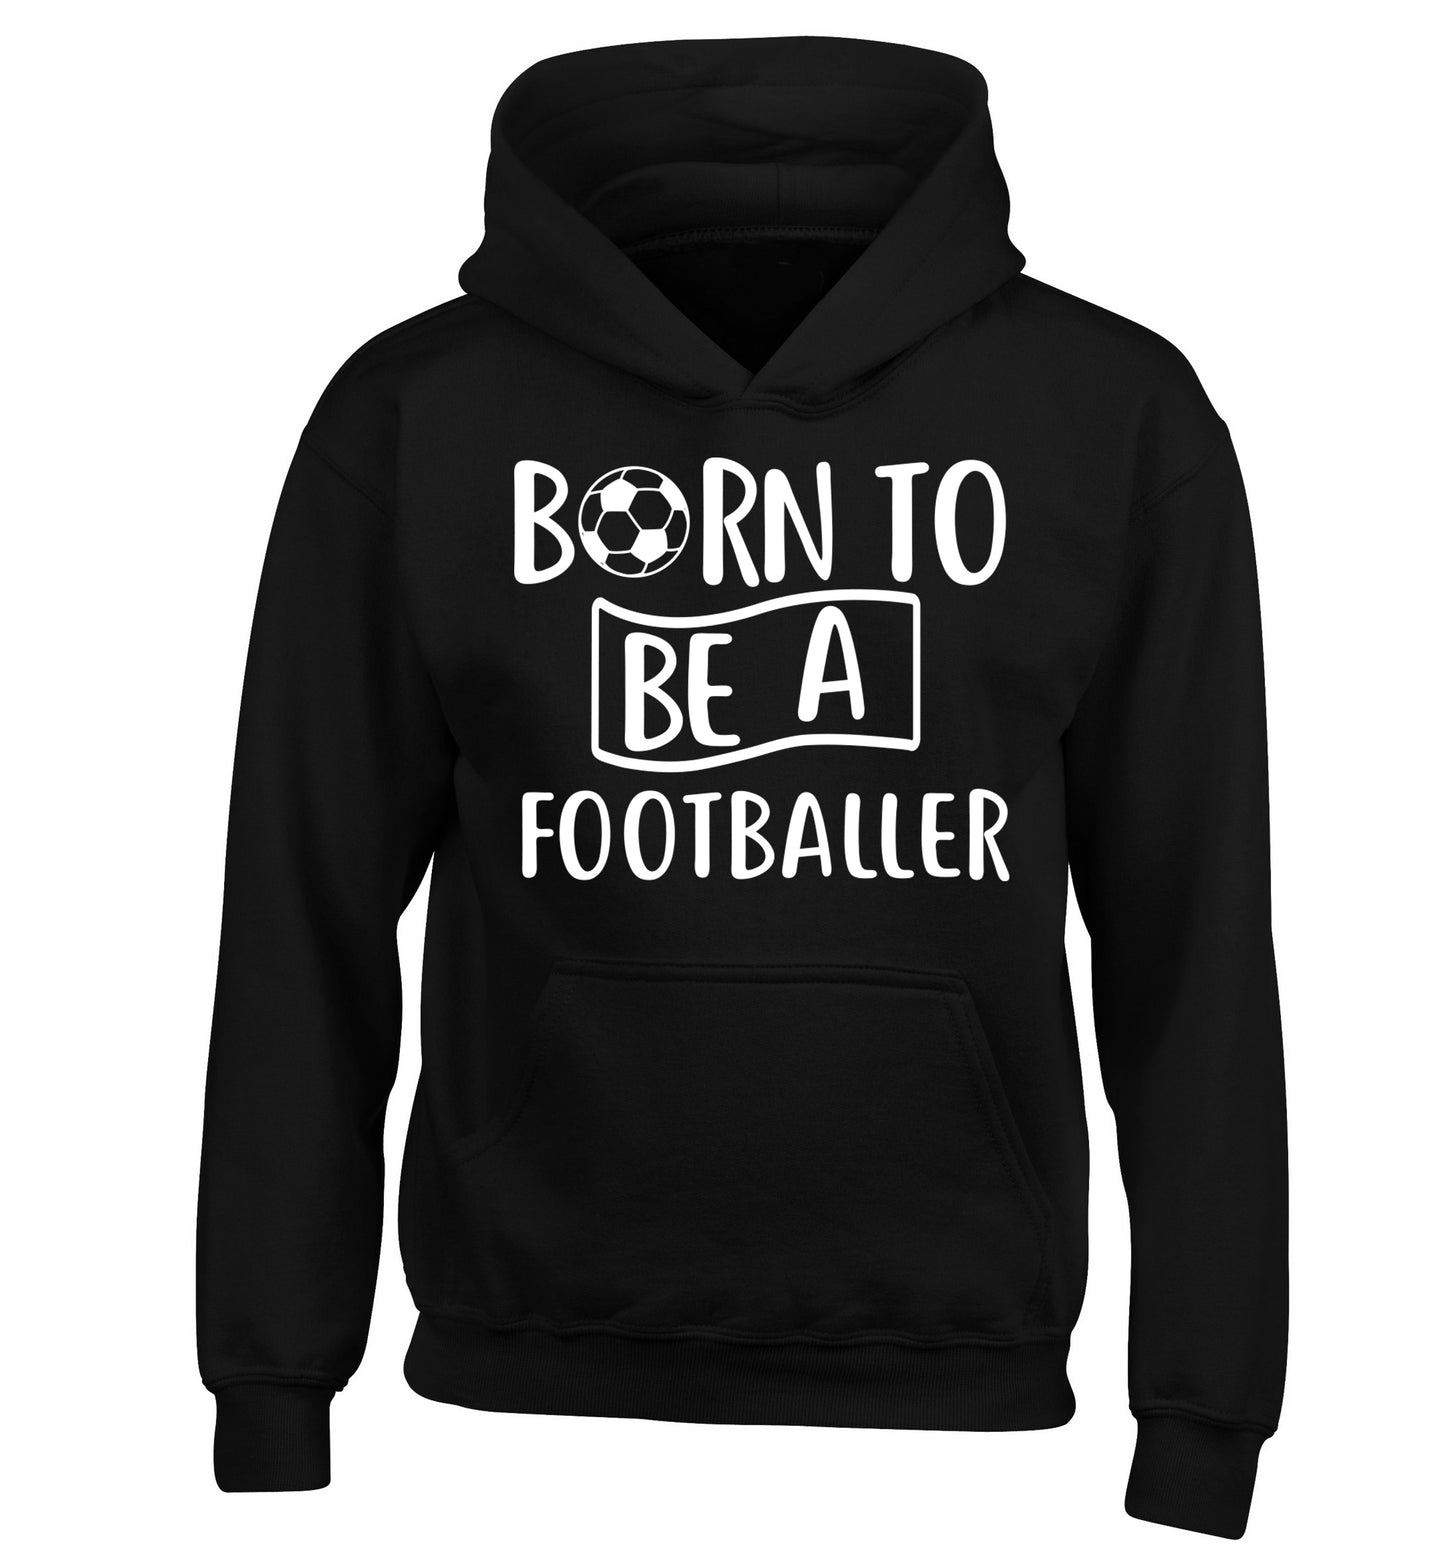 Born to be a footballer children's black hoodie 12-14 Years